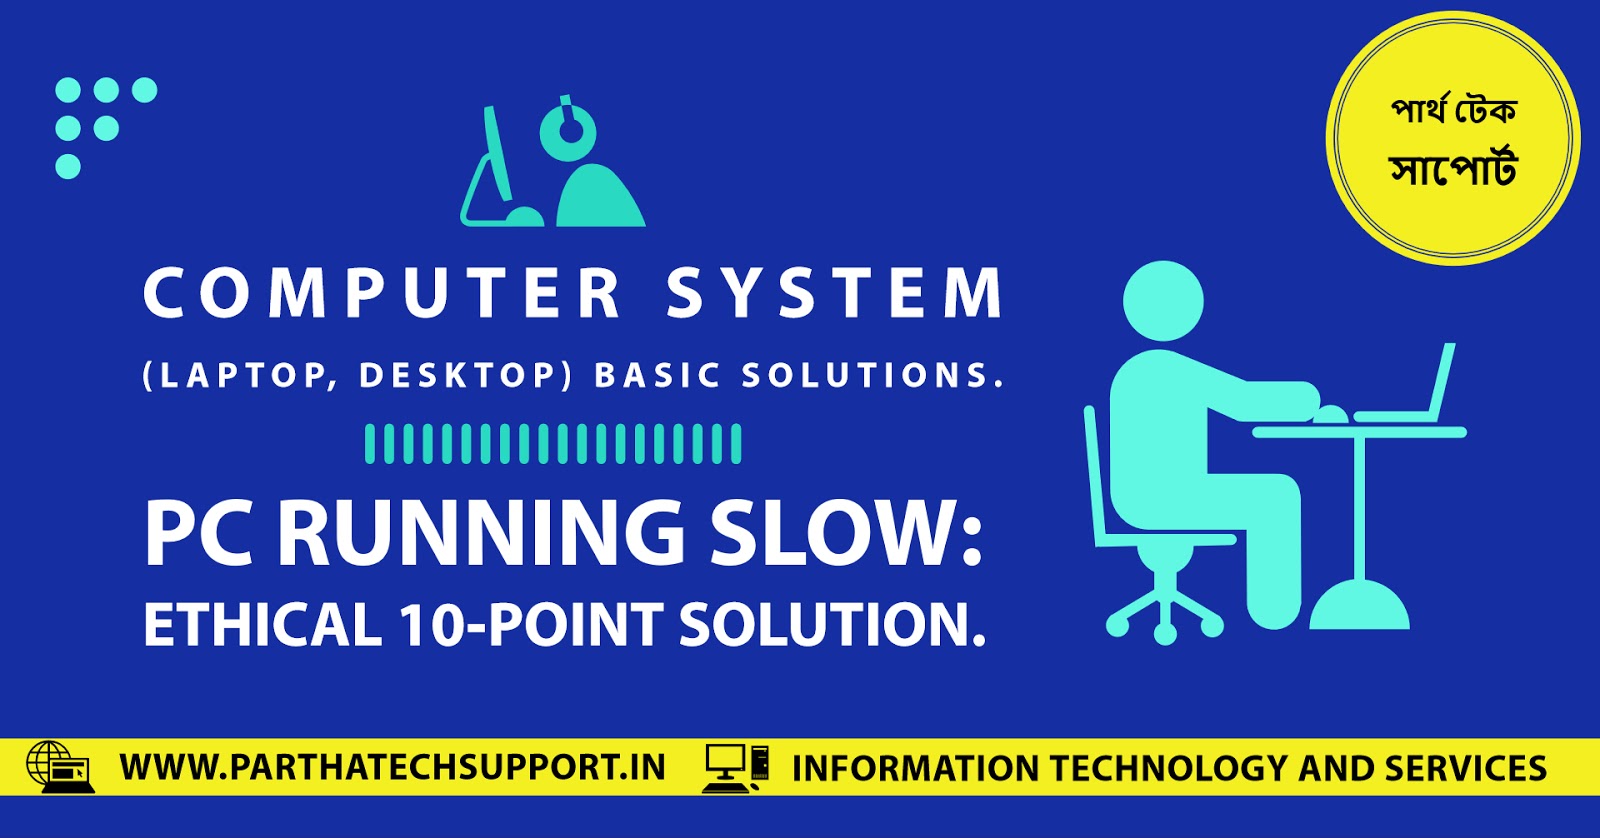 Run system update. Bharat operating System solutions. Work slowly.